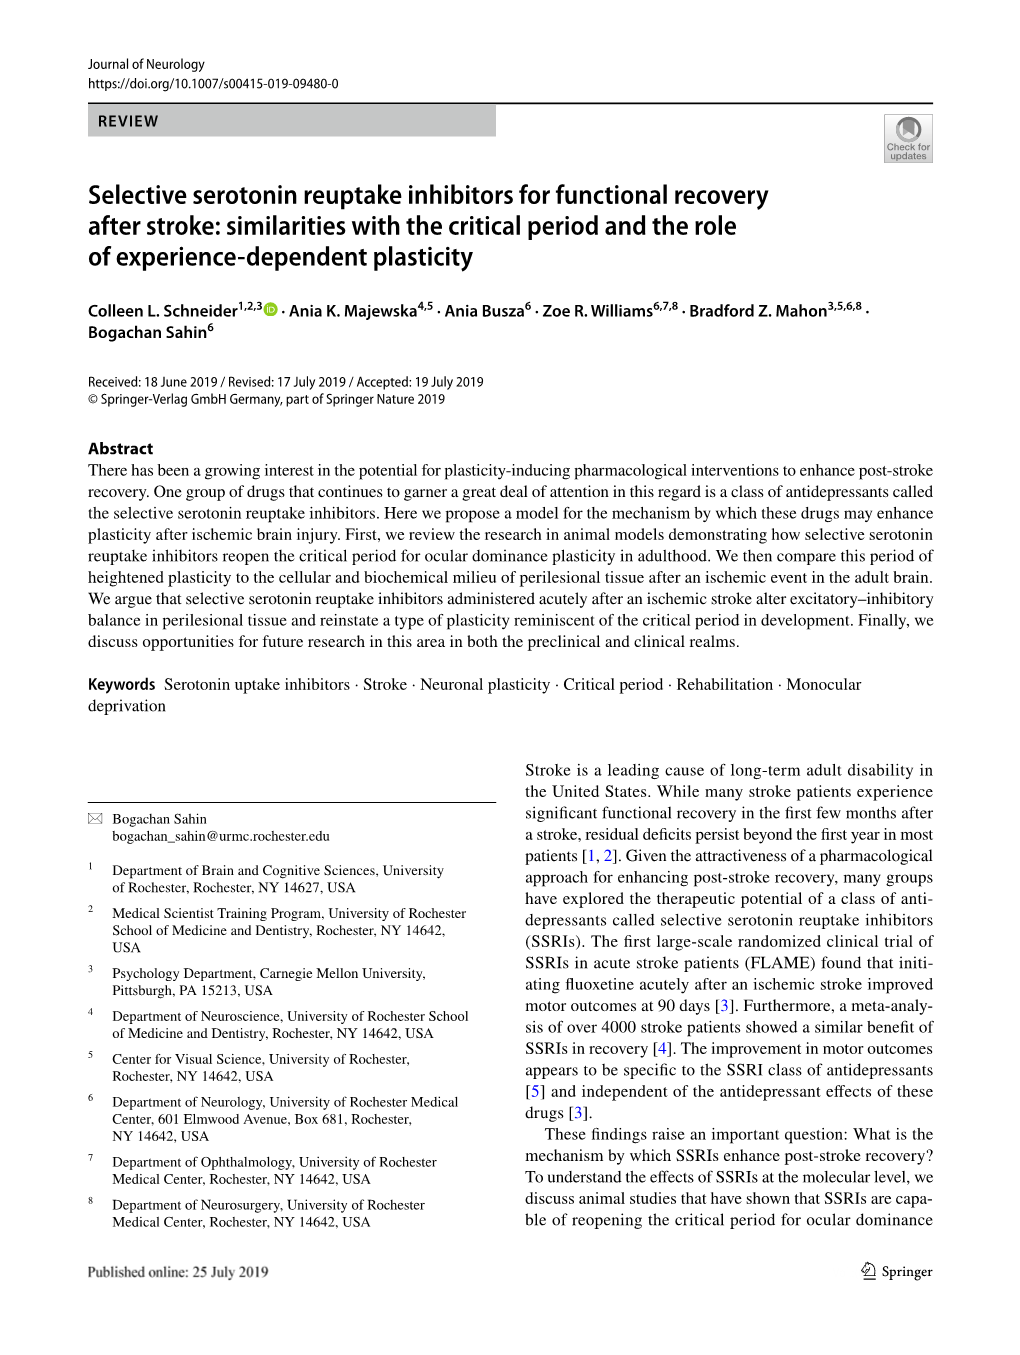 Selective Serotonin Reuptake Inhibitors for Functional Recovery After Stroke: Similarities with the Critical Period and the Role of Experience‑Dependent Plasticity